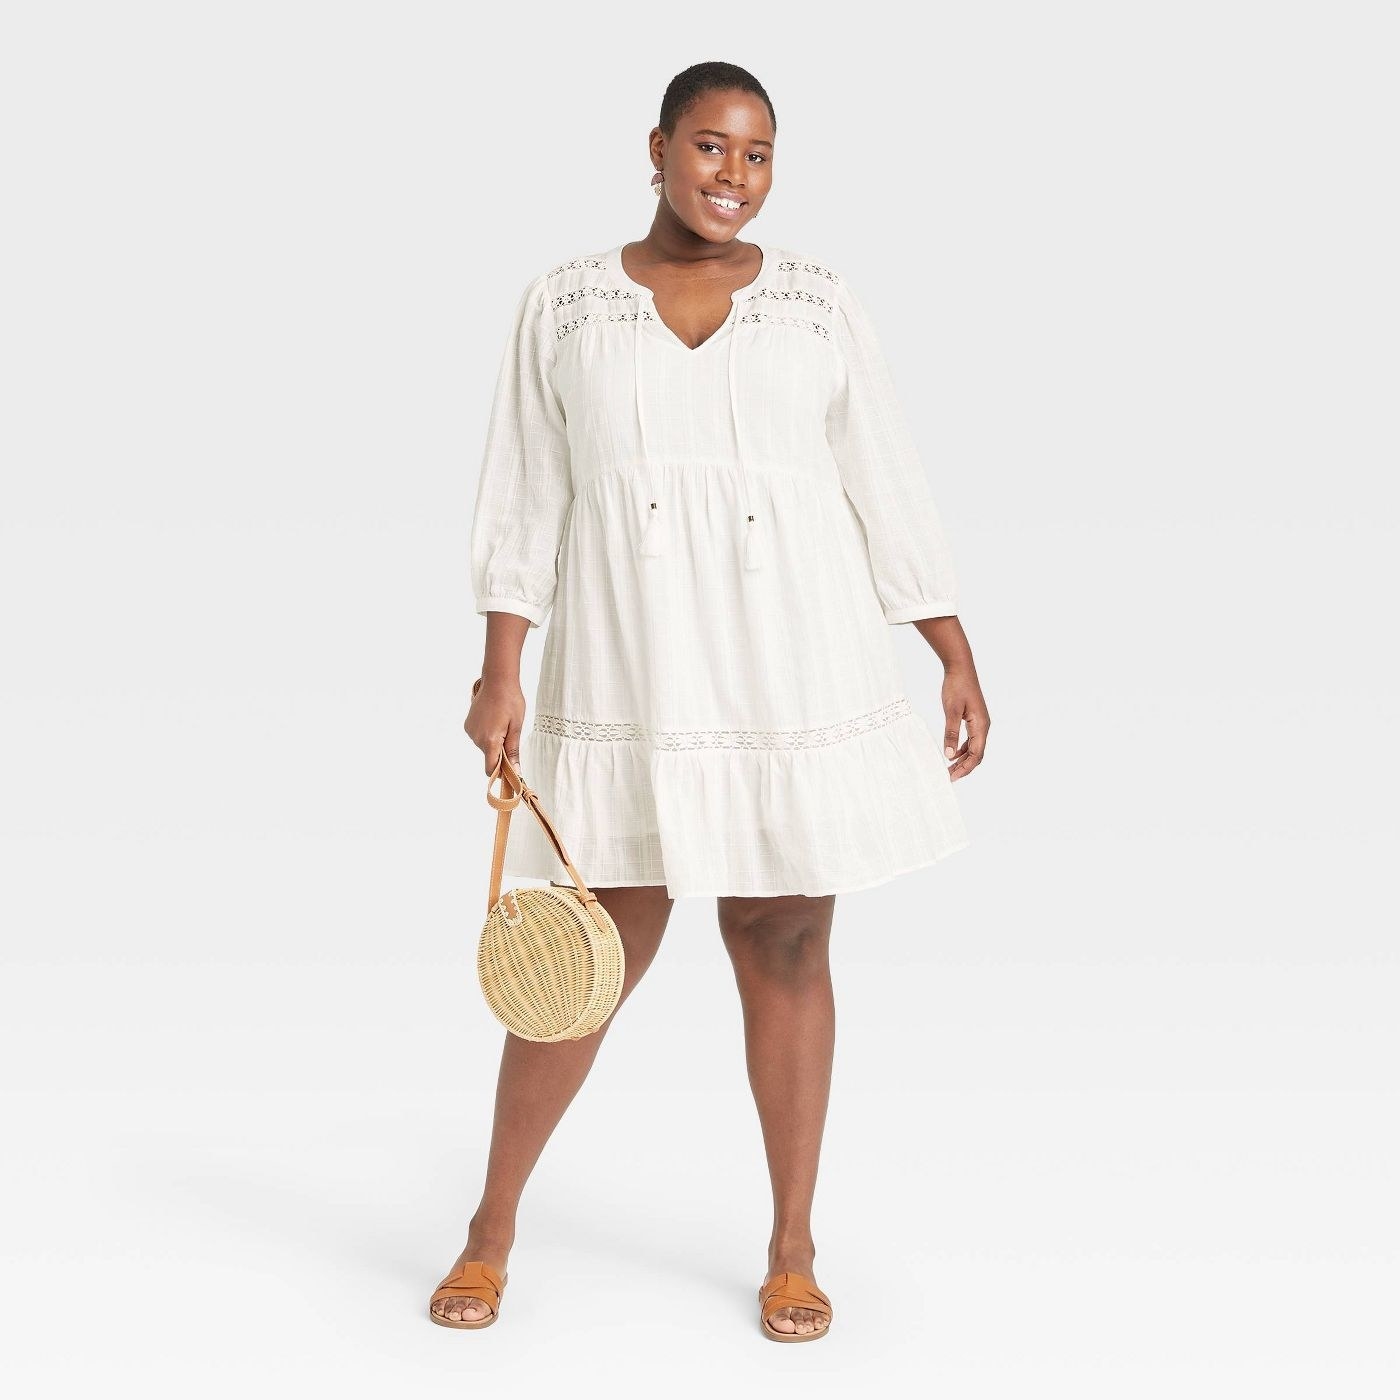 31 Gorgeous Dresses From Target That Just Might Become Your Go-To